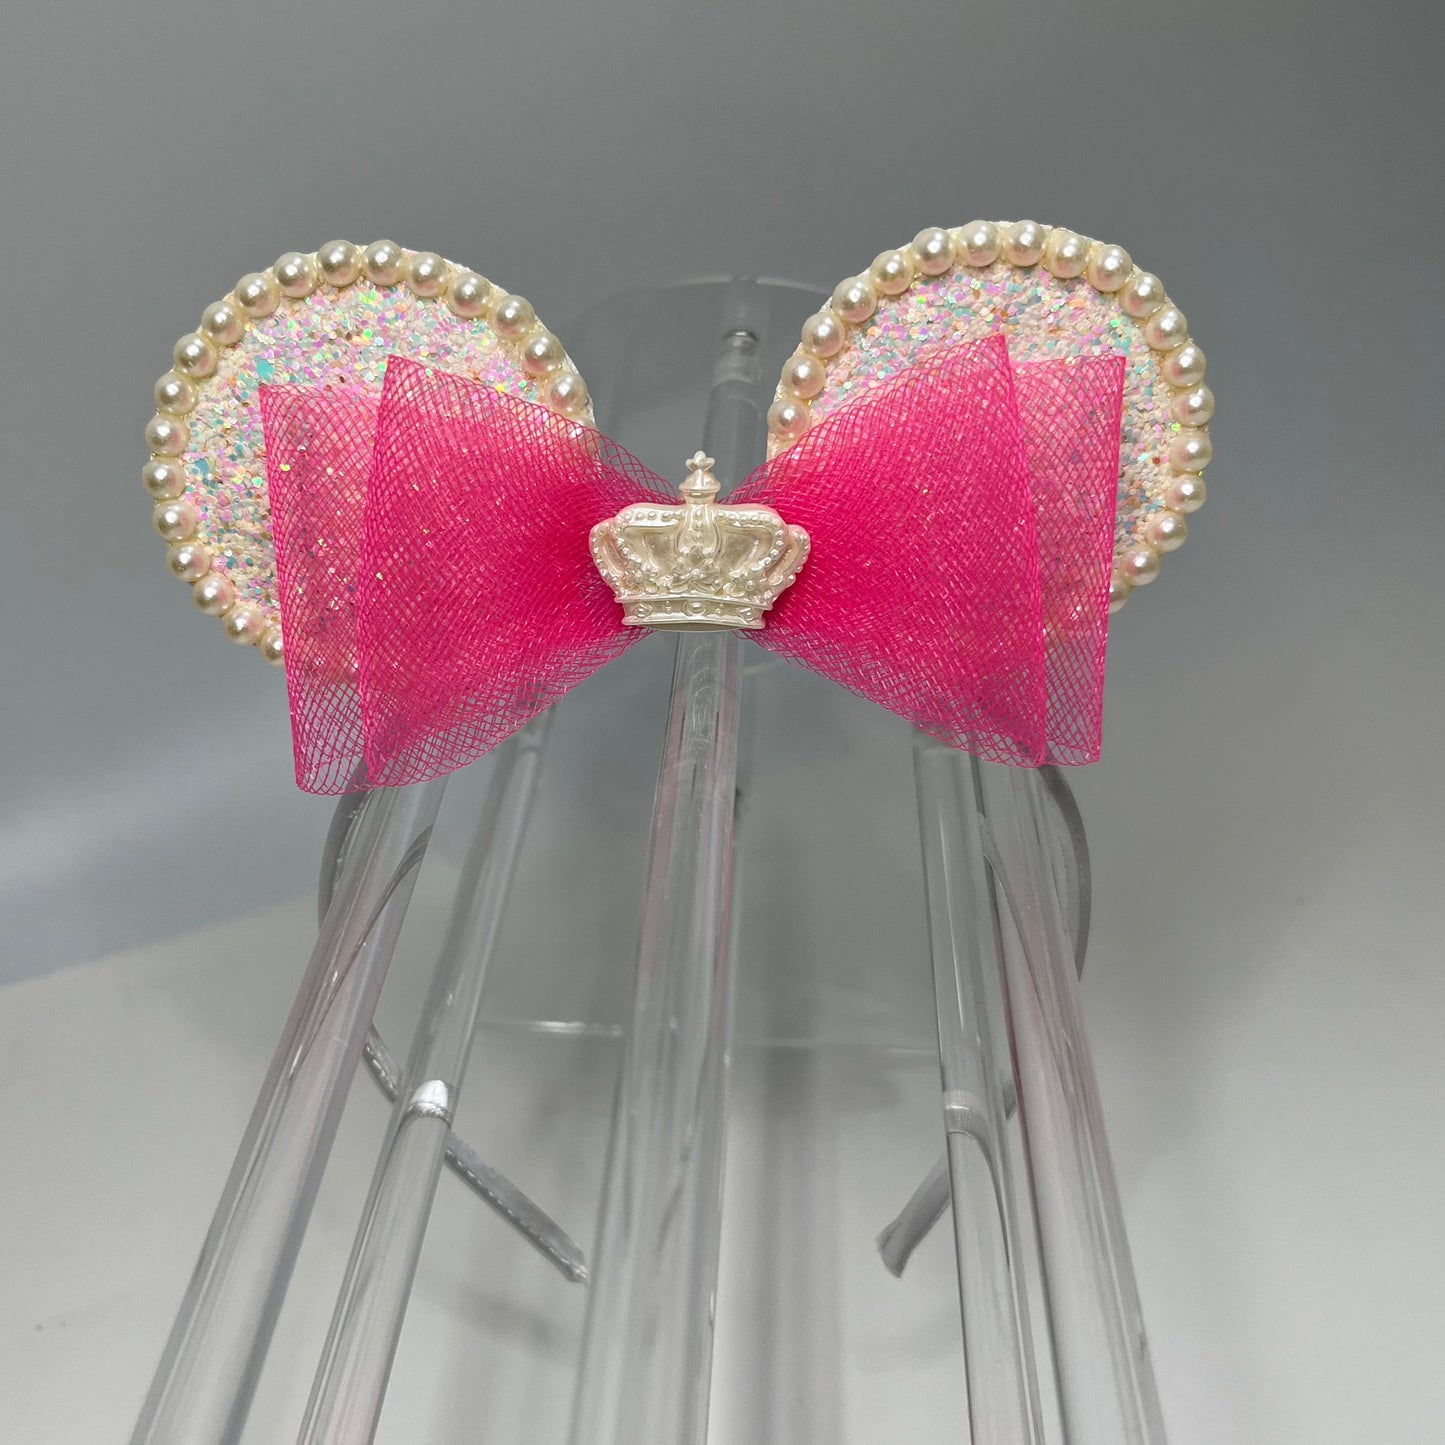 Minnie Mouse Ears Hairband for Fun Parties | Birthday Accessories